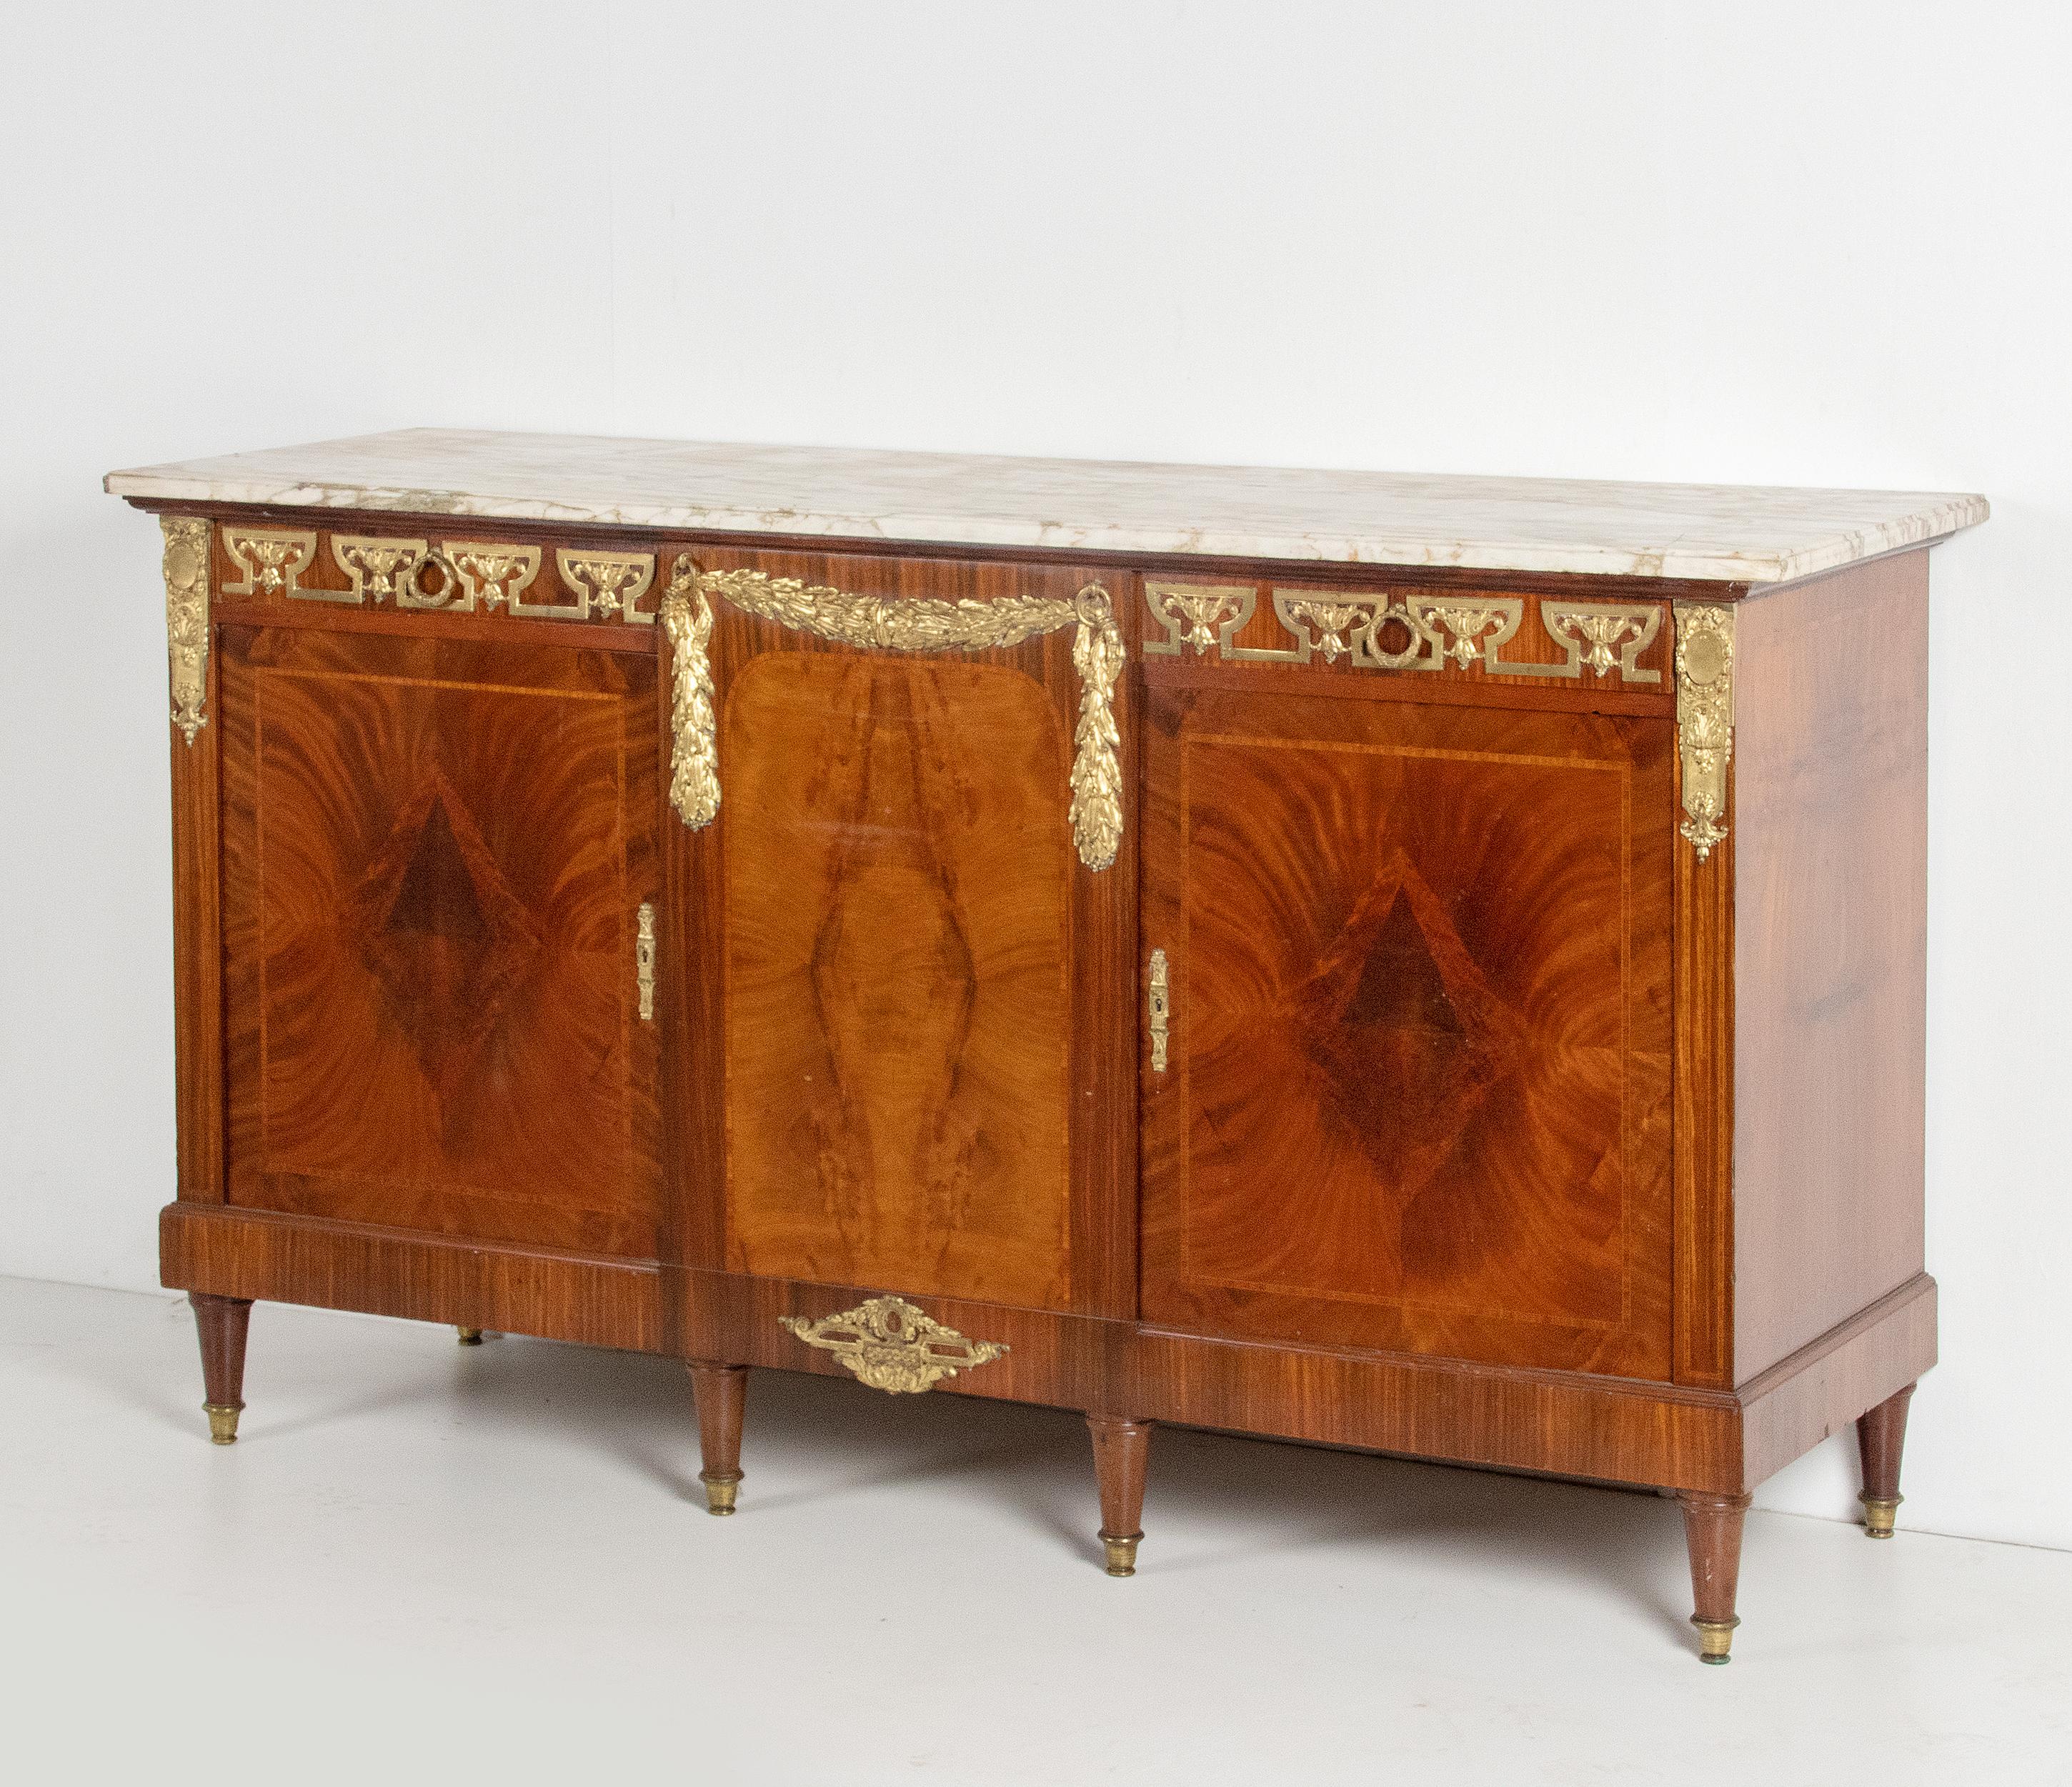 An antique French veneered Louis XVI style 2-door sideboard. The furniture was made in the late 19th century, about 1880-1890. This dresser is decorated with gilded bronze fittings, in the centre a ormolu bronze garland in the middle. The cabinet